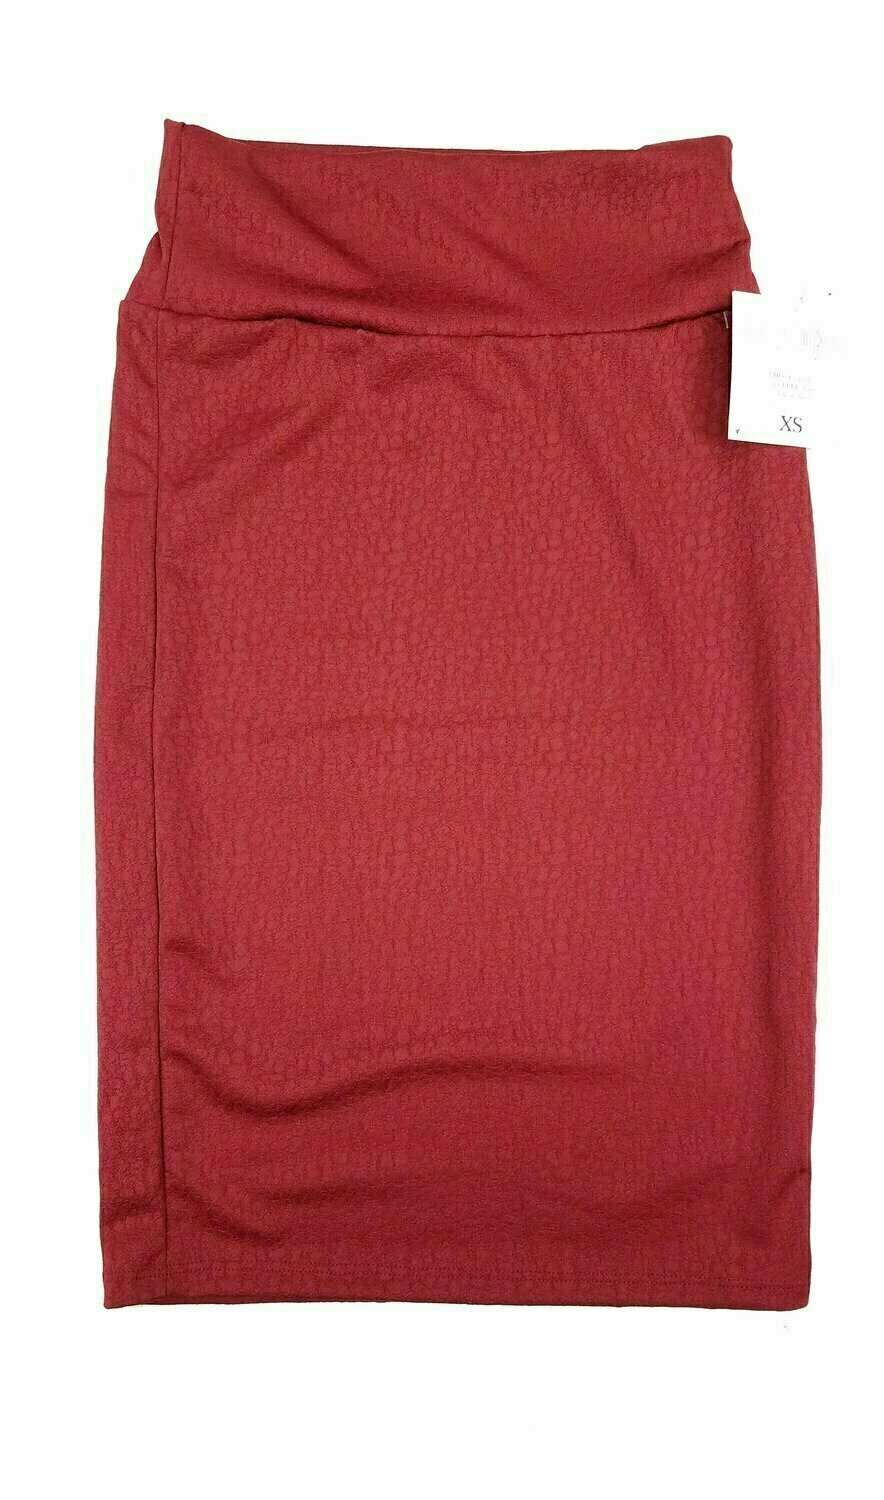 LuLaRoe Cassie b X-Small (XS) Embossed Faux Alligator Skin Red Womens Knee Length Pencil Skirt fits sizes 2-4  XS-51